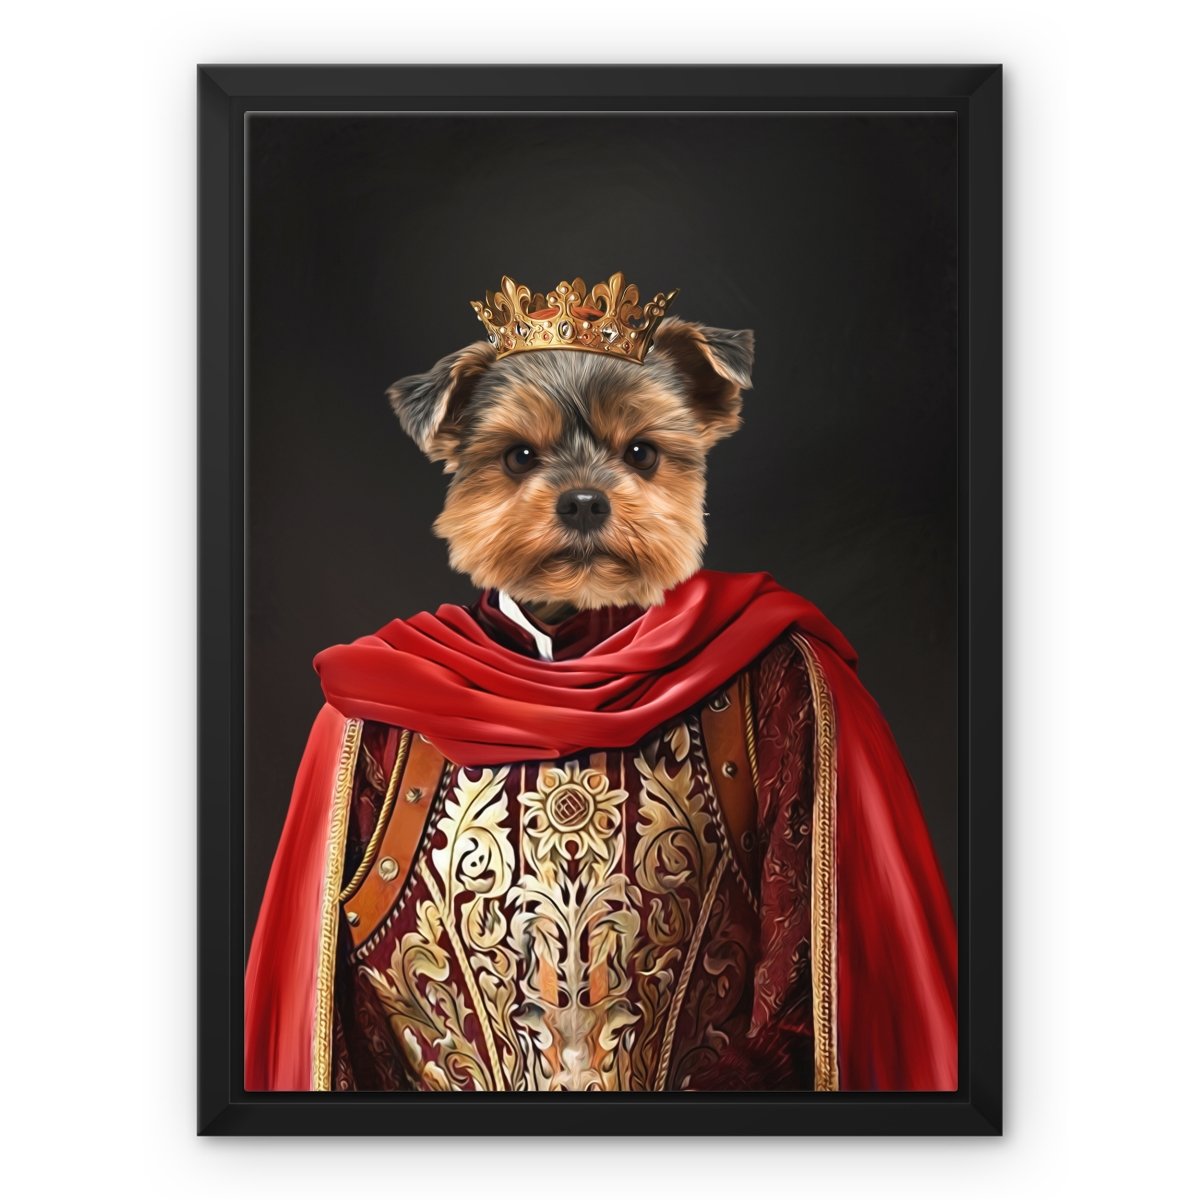 The Young King: Custom Pet Canvas - Paw & Glory - #pet portraits# - #dog portraits# - #pet portraits uk#paw and glory, custom pet portrait canvas,dog canvas custom, personalized pet canvas, personalized pet canvas art, custom dog canvas art, canvas of your dog